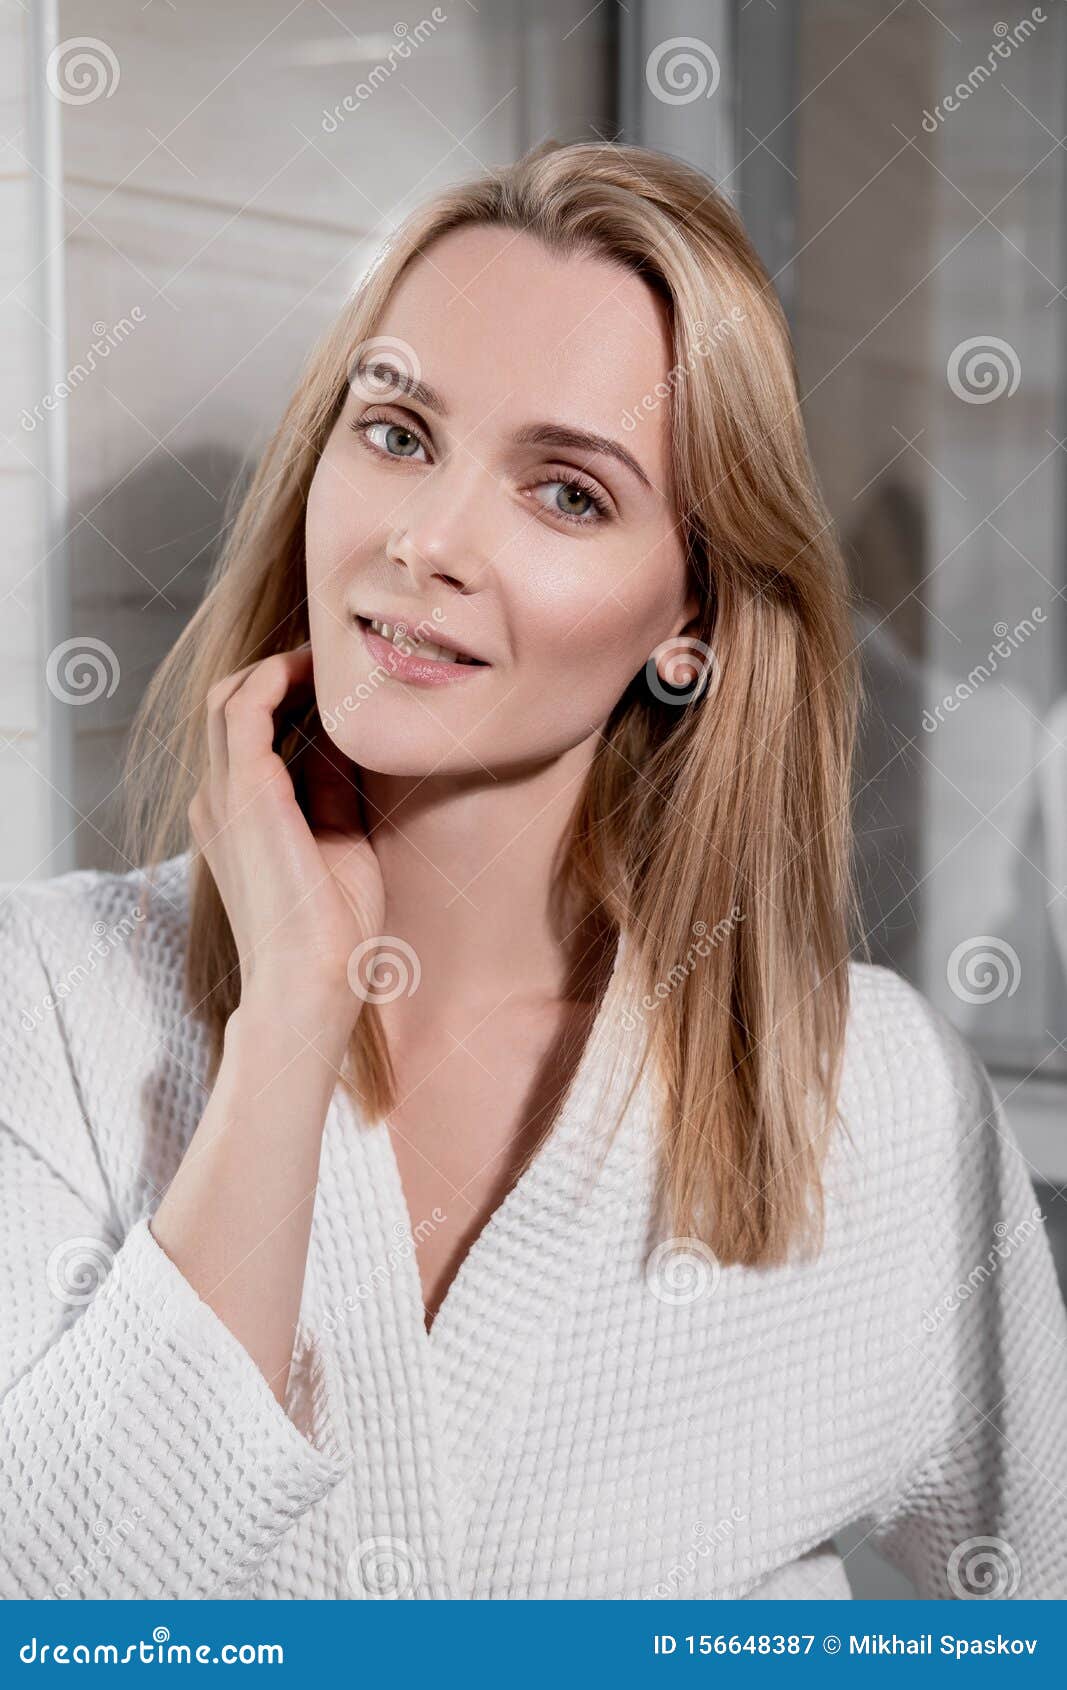 Attractive Middle Age Blond Woman In White Bathrobe In Bathroom He Enters The Glass Shower And